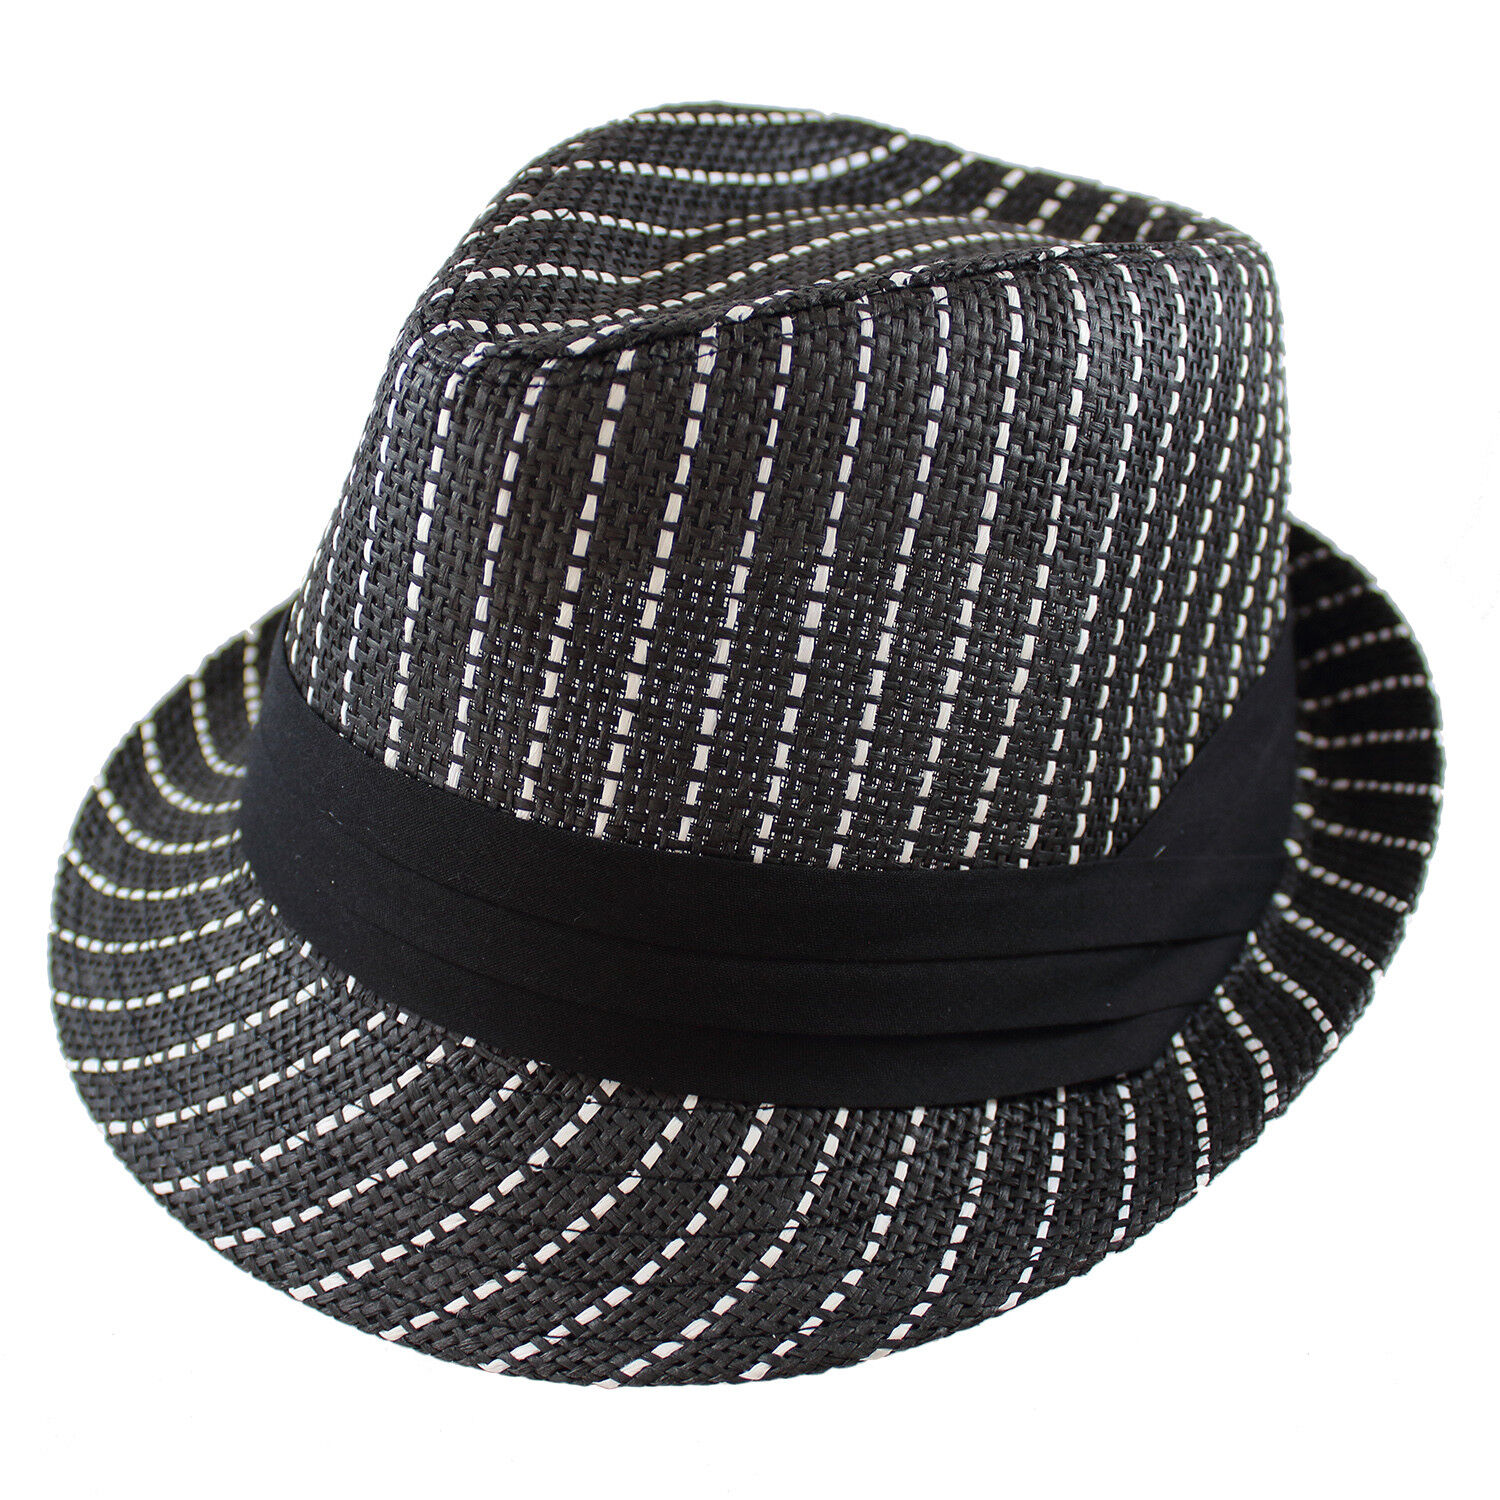 Gelante Unisex Summer Fedora Panama Straw Hats with Band (Ship in a BOX)